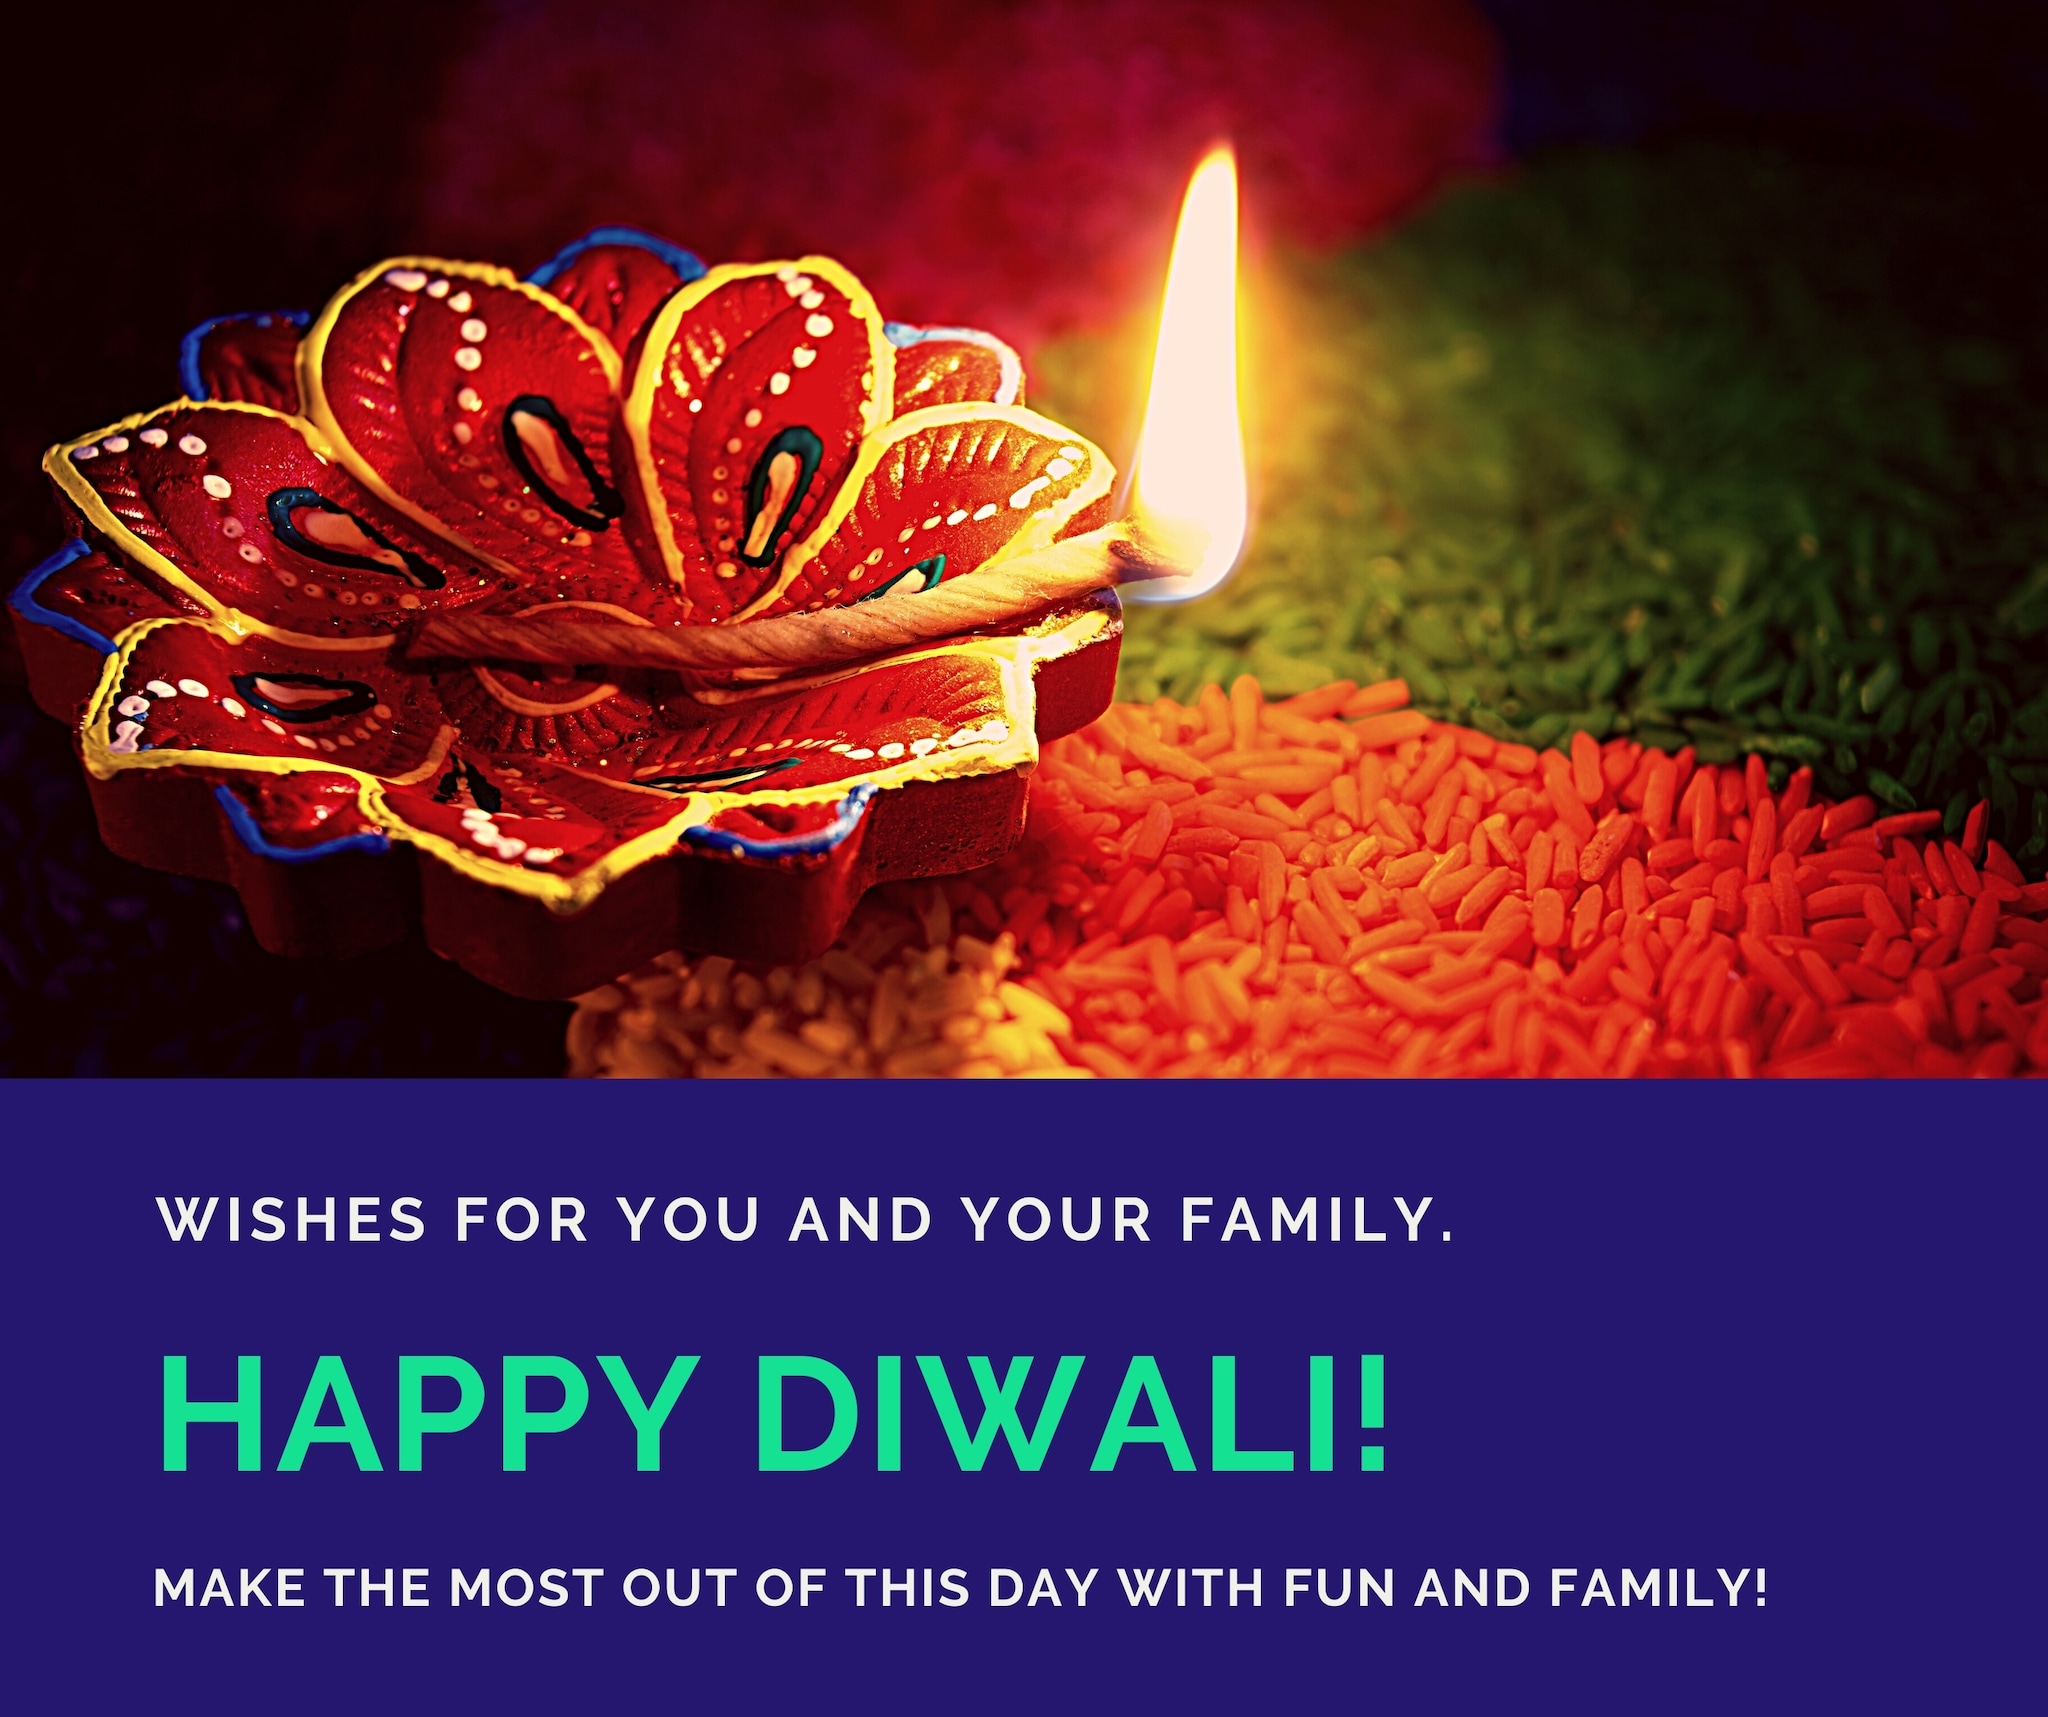 Happy Diwali 2022 Wishes, Greetings, Whatsapp Status, Images And Quotes You Can Share With Your Dear Ones. (Image: Shutterstock) 